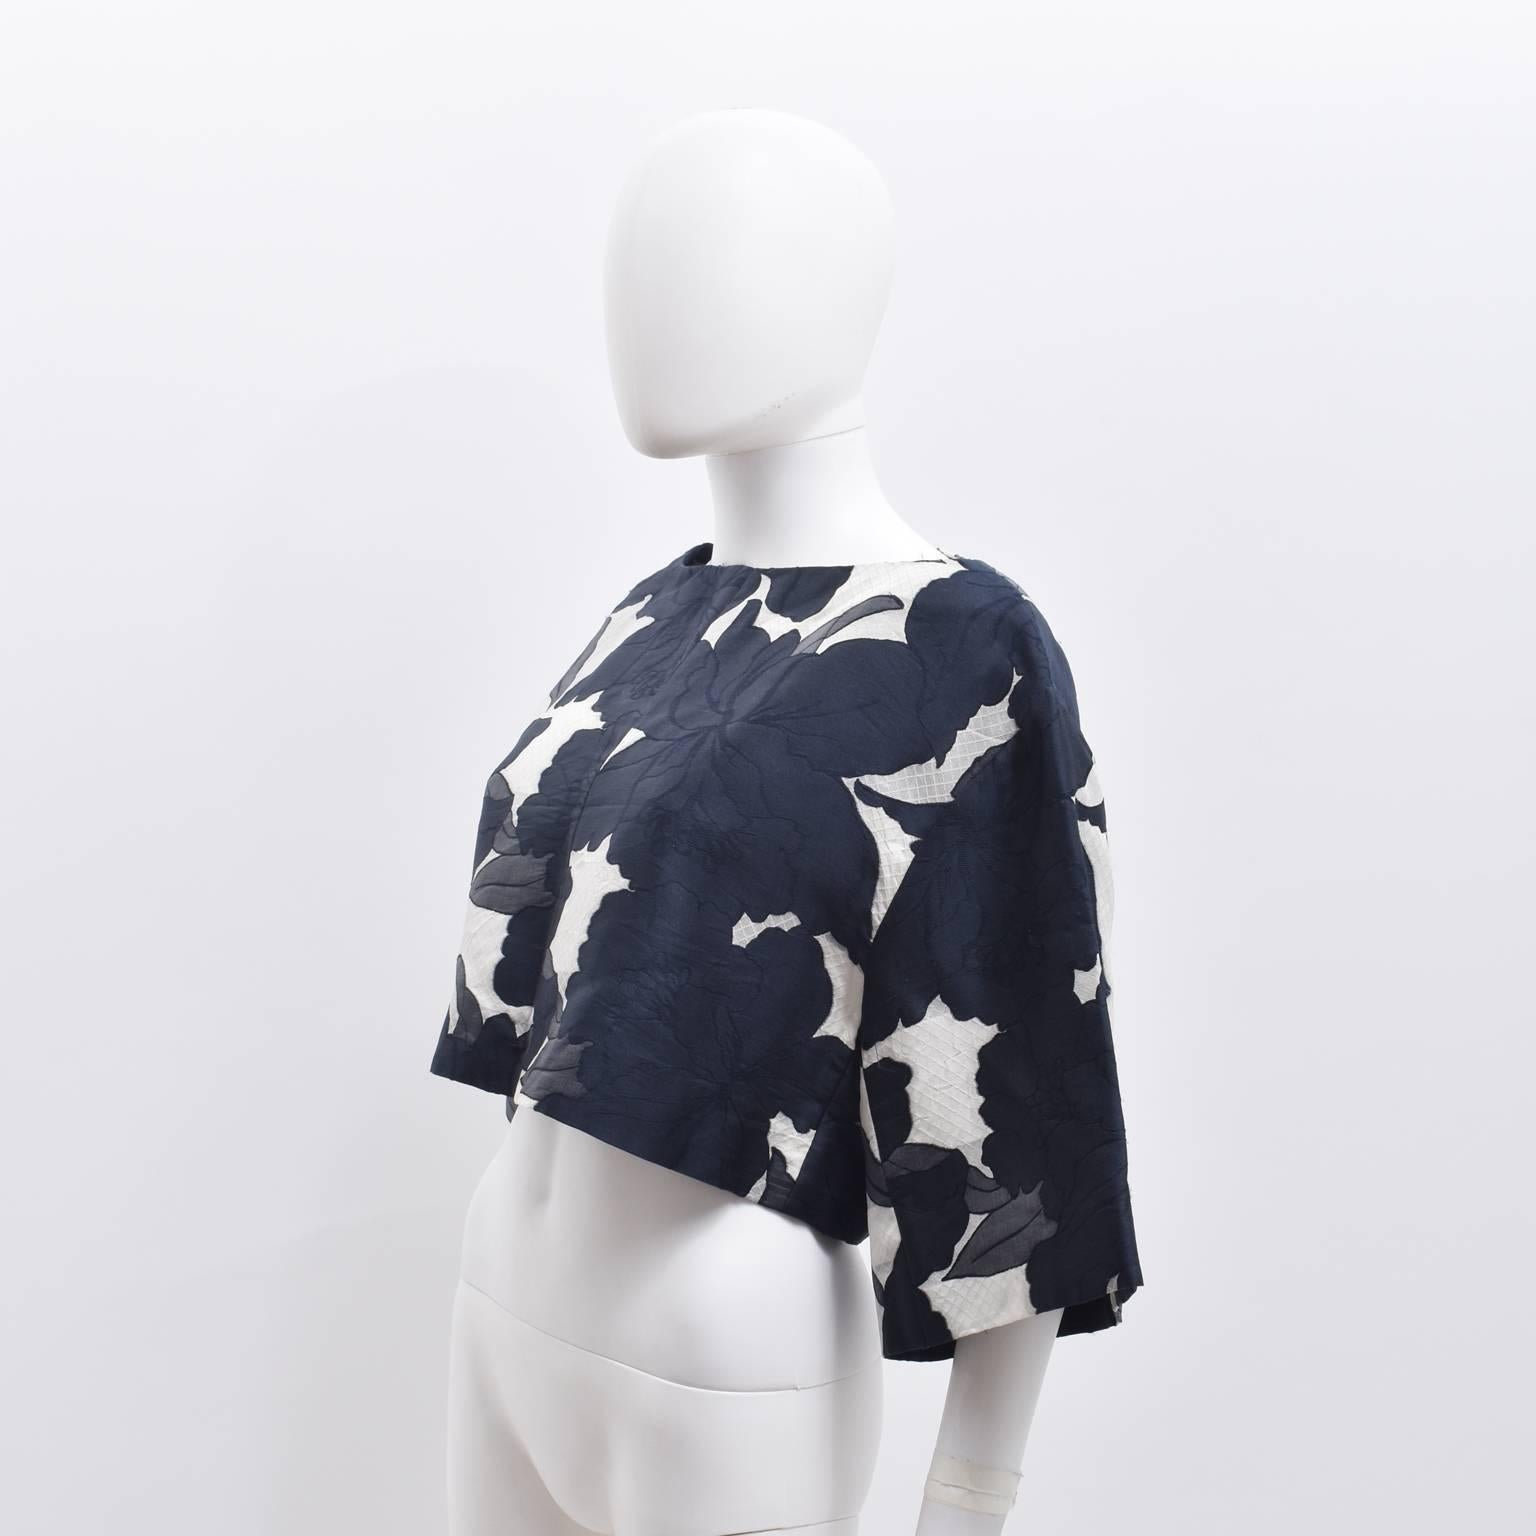 An elegant and contemporary floral cropped top from French label Chloe. The top has a boxy, cropped shape with wide, three-quarter length sleeves and a wide neckline. It is made from a silk and polyester blend jacquard material with a large floral